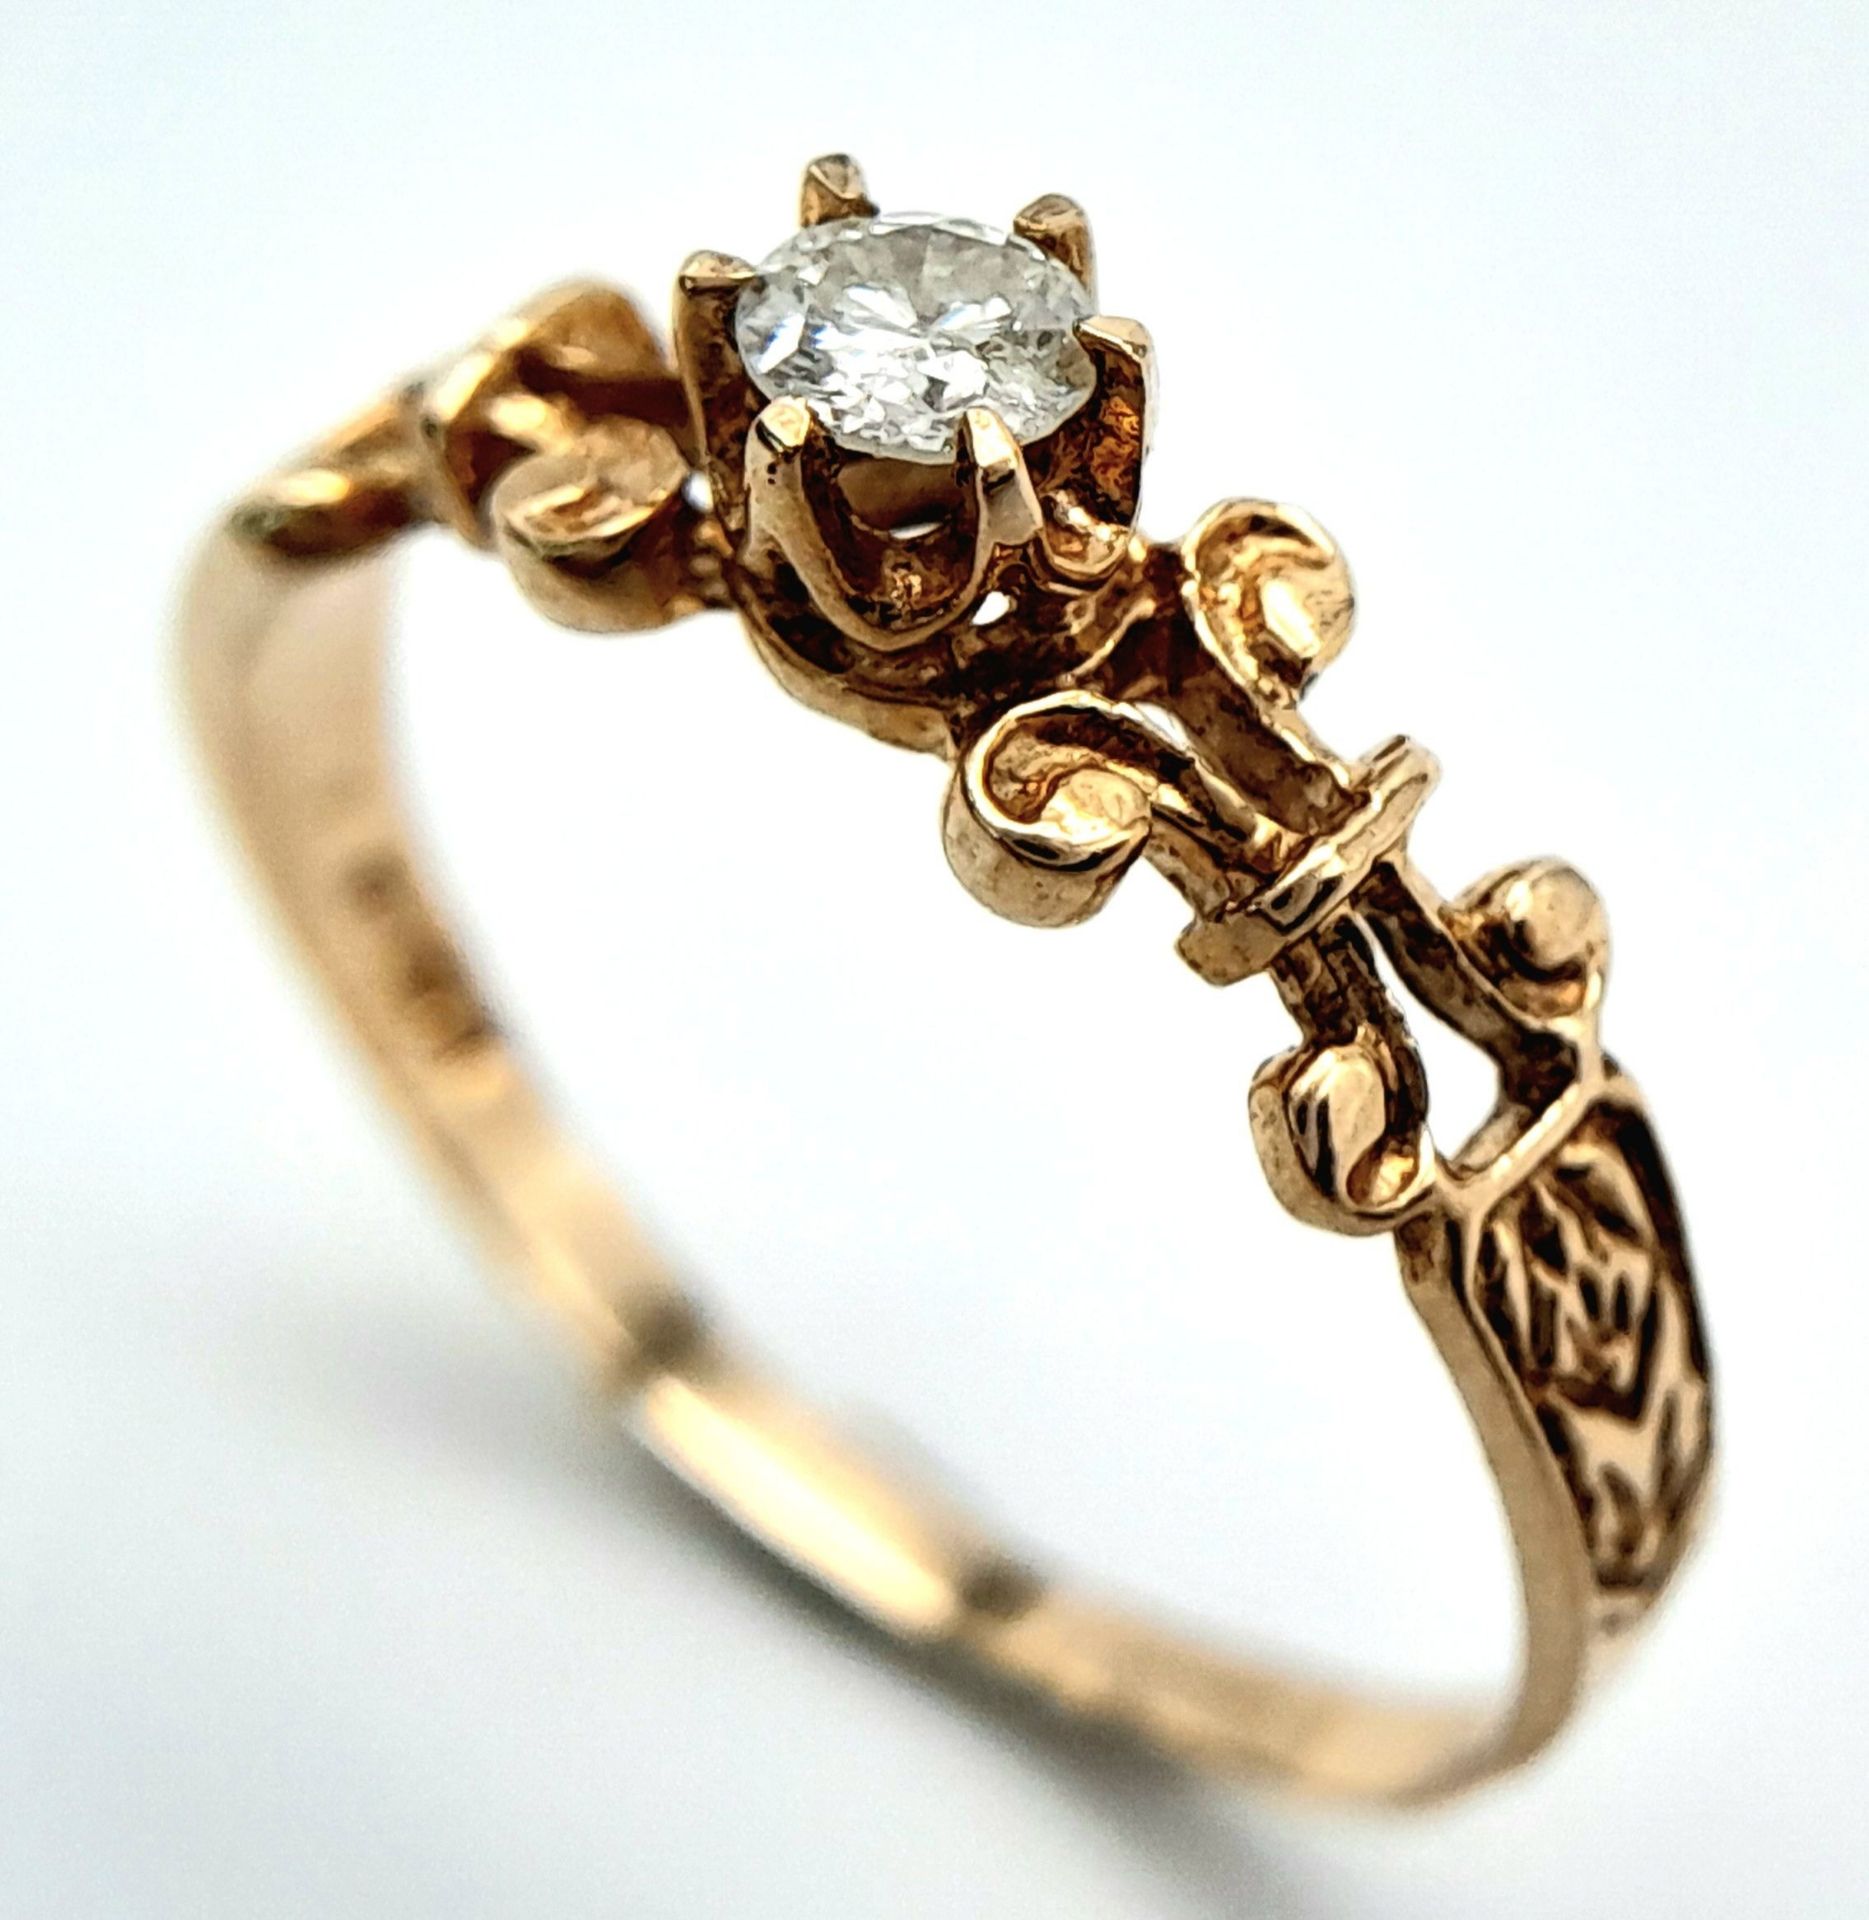 A 9K YELLOW GOLD FANCY DIAMOND SOLITAIRE RING. 0.15CT. 1.3G. SIZE N - Image 3 of 6